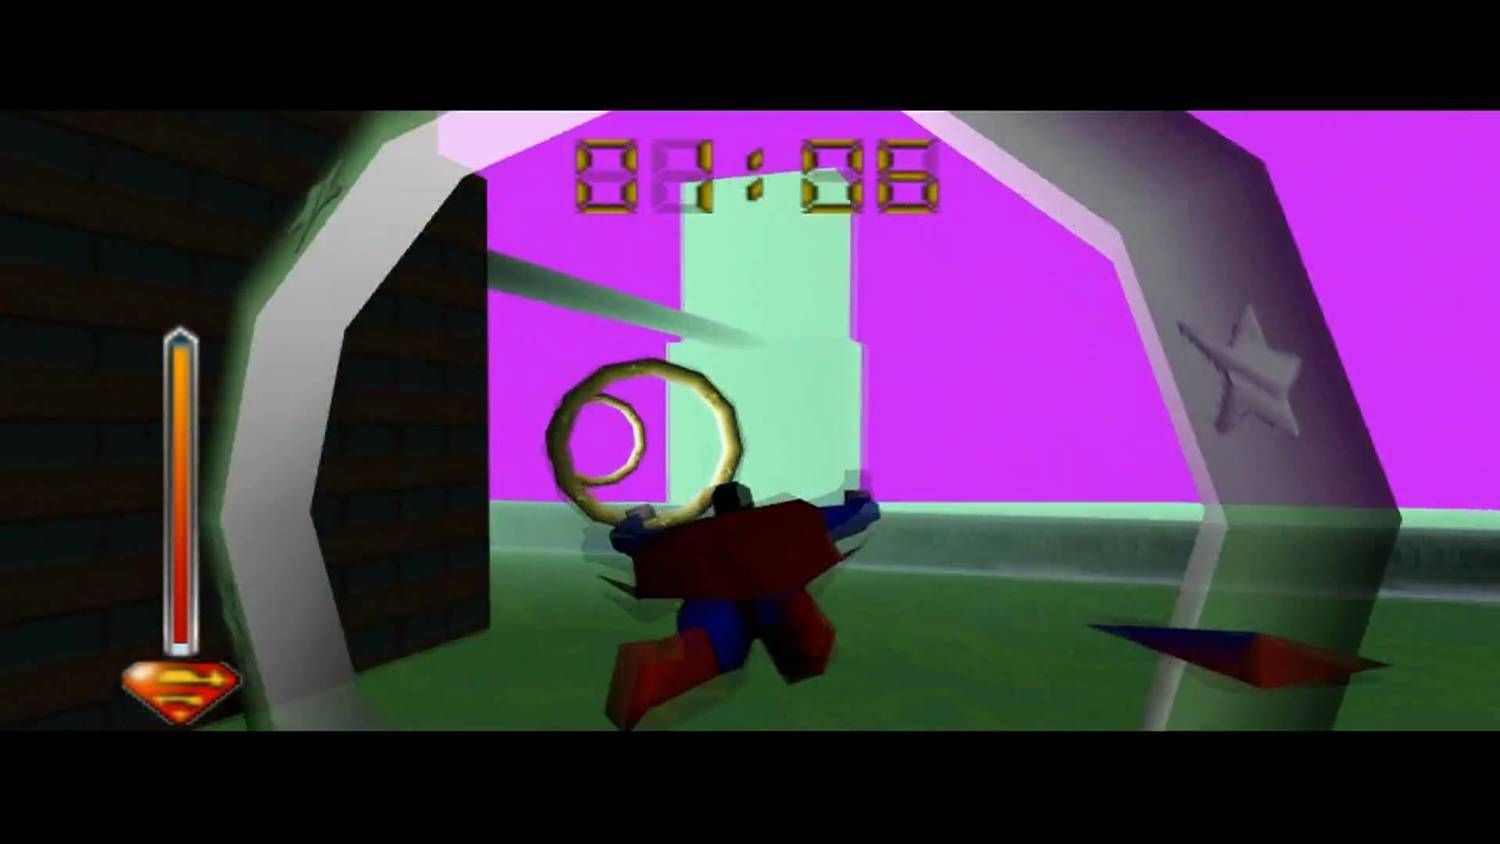 Superman flying through a ring in Superman 64